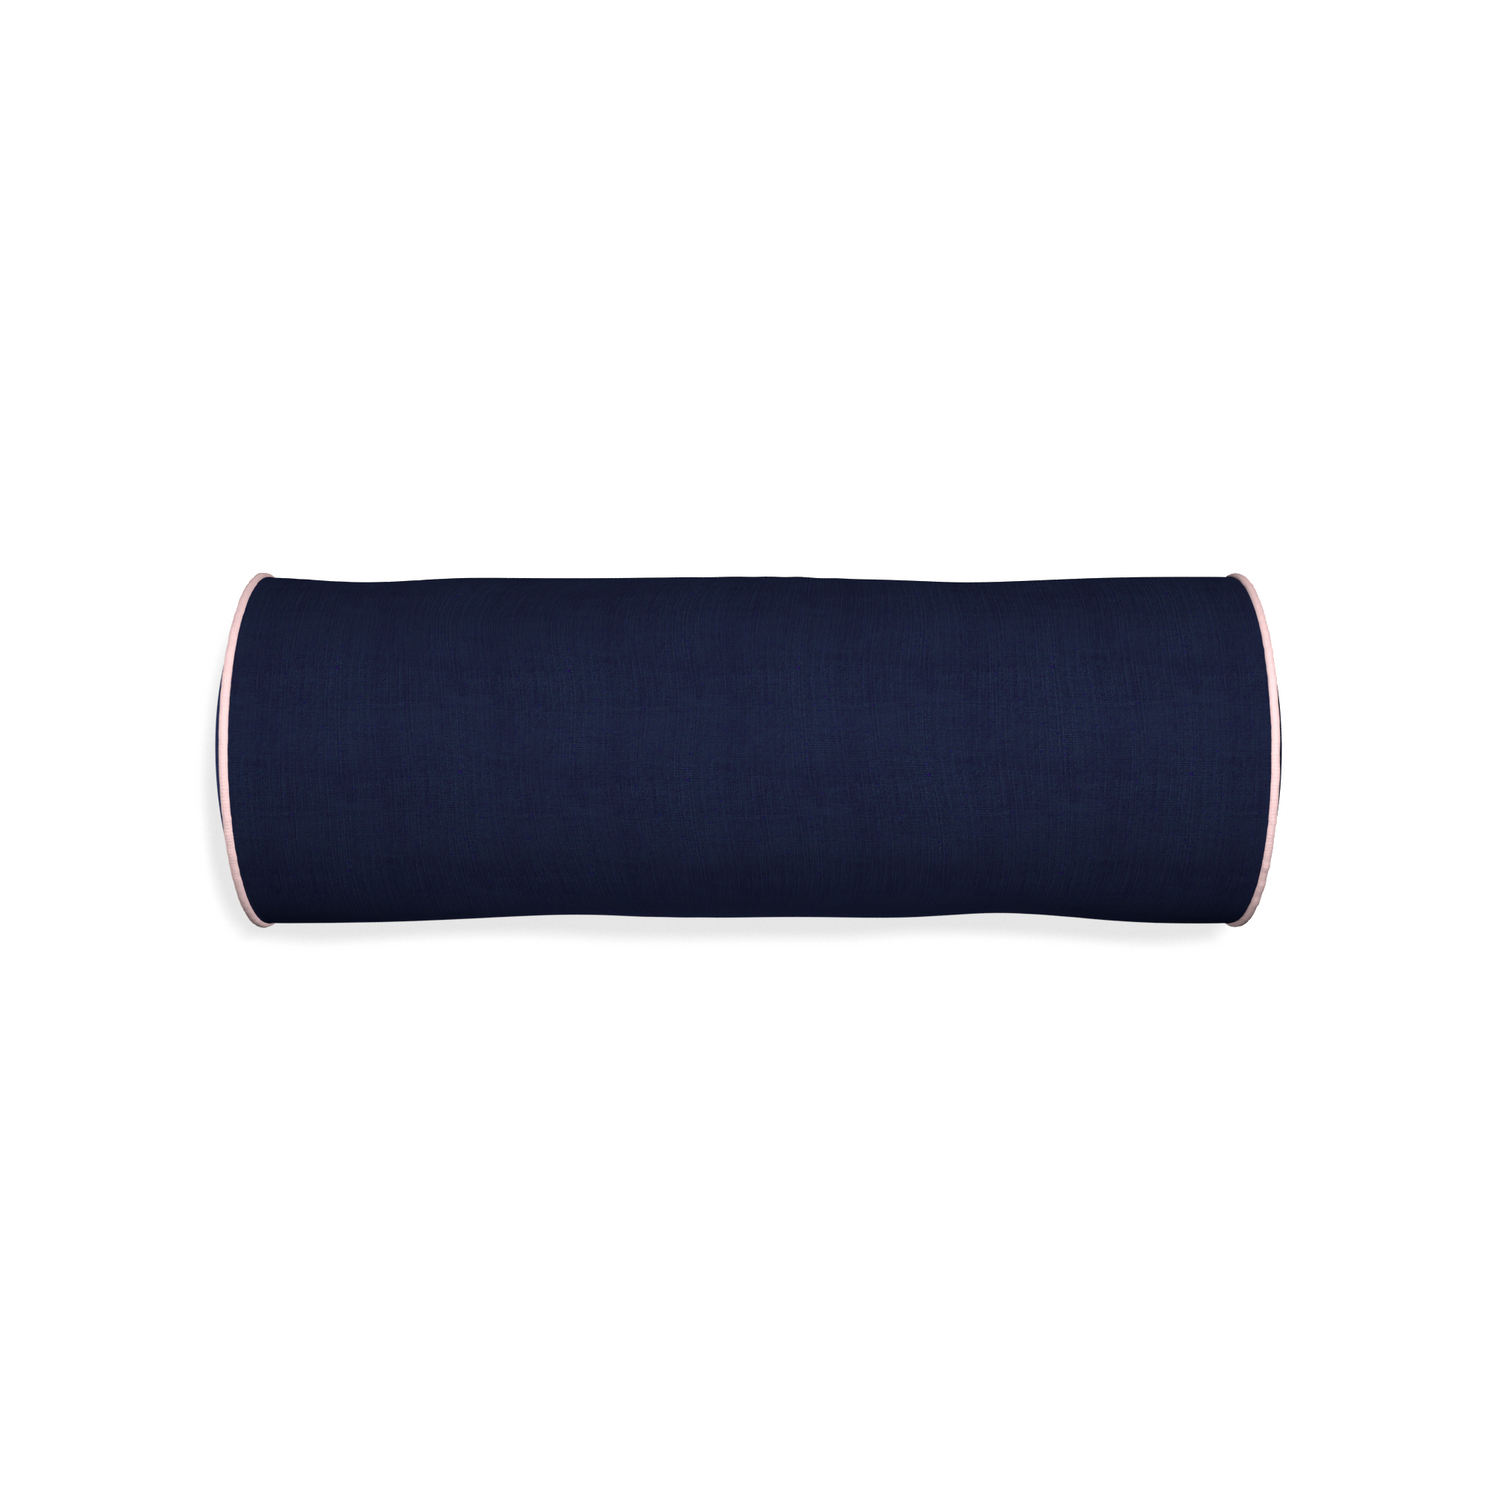 Bolster midnight custom navy bluepillow with petal piping on white background